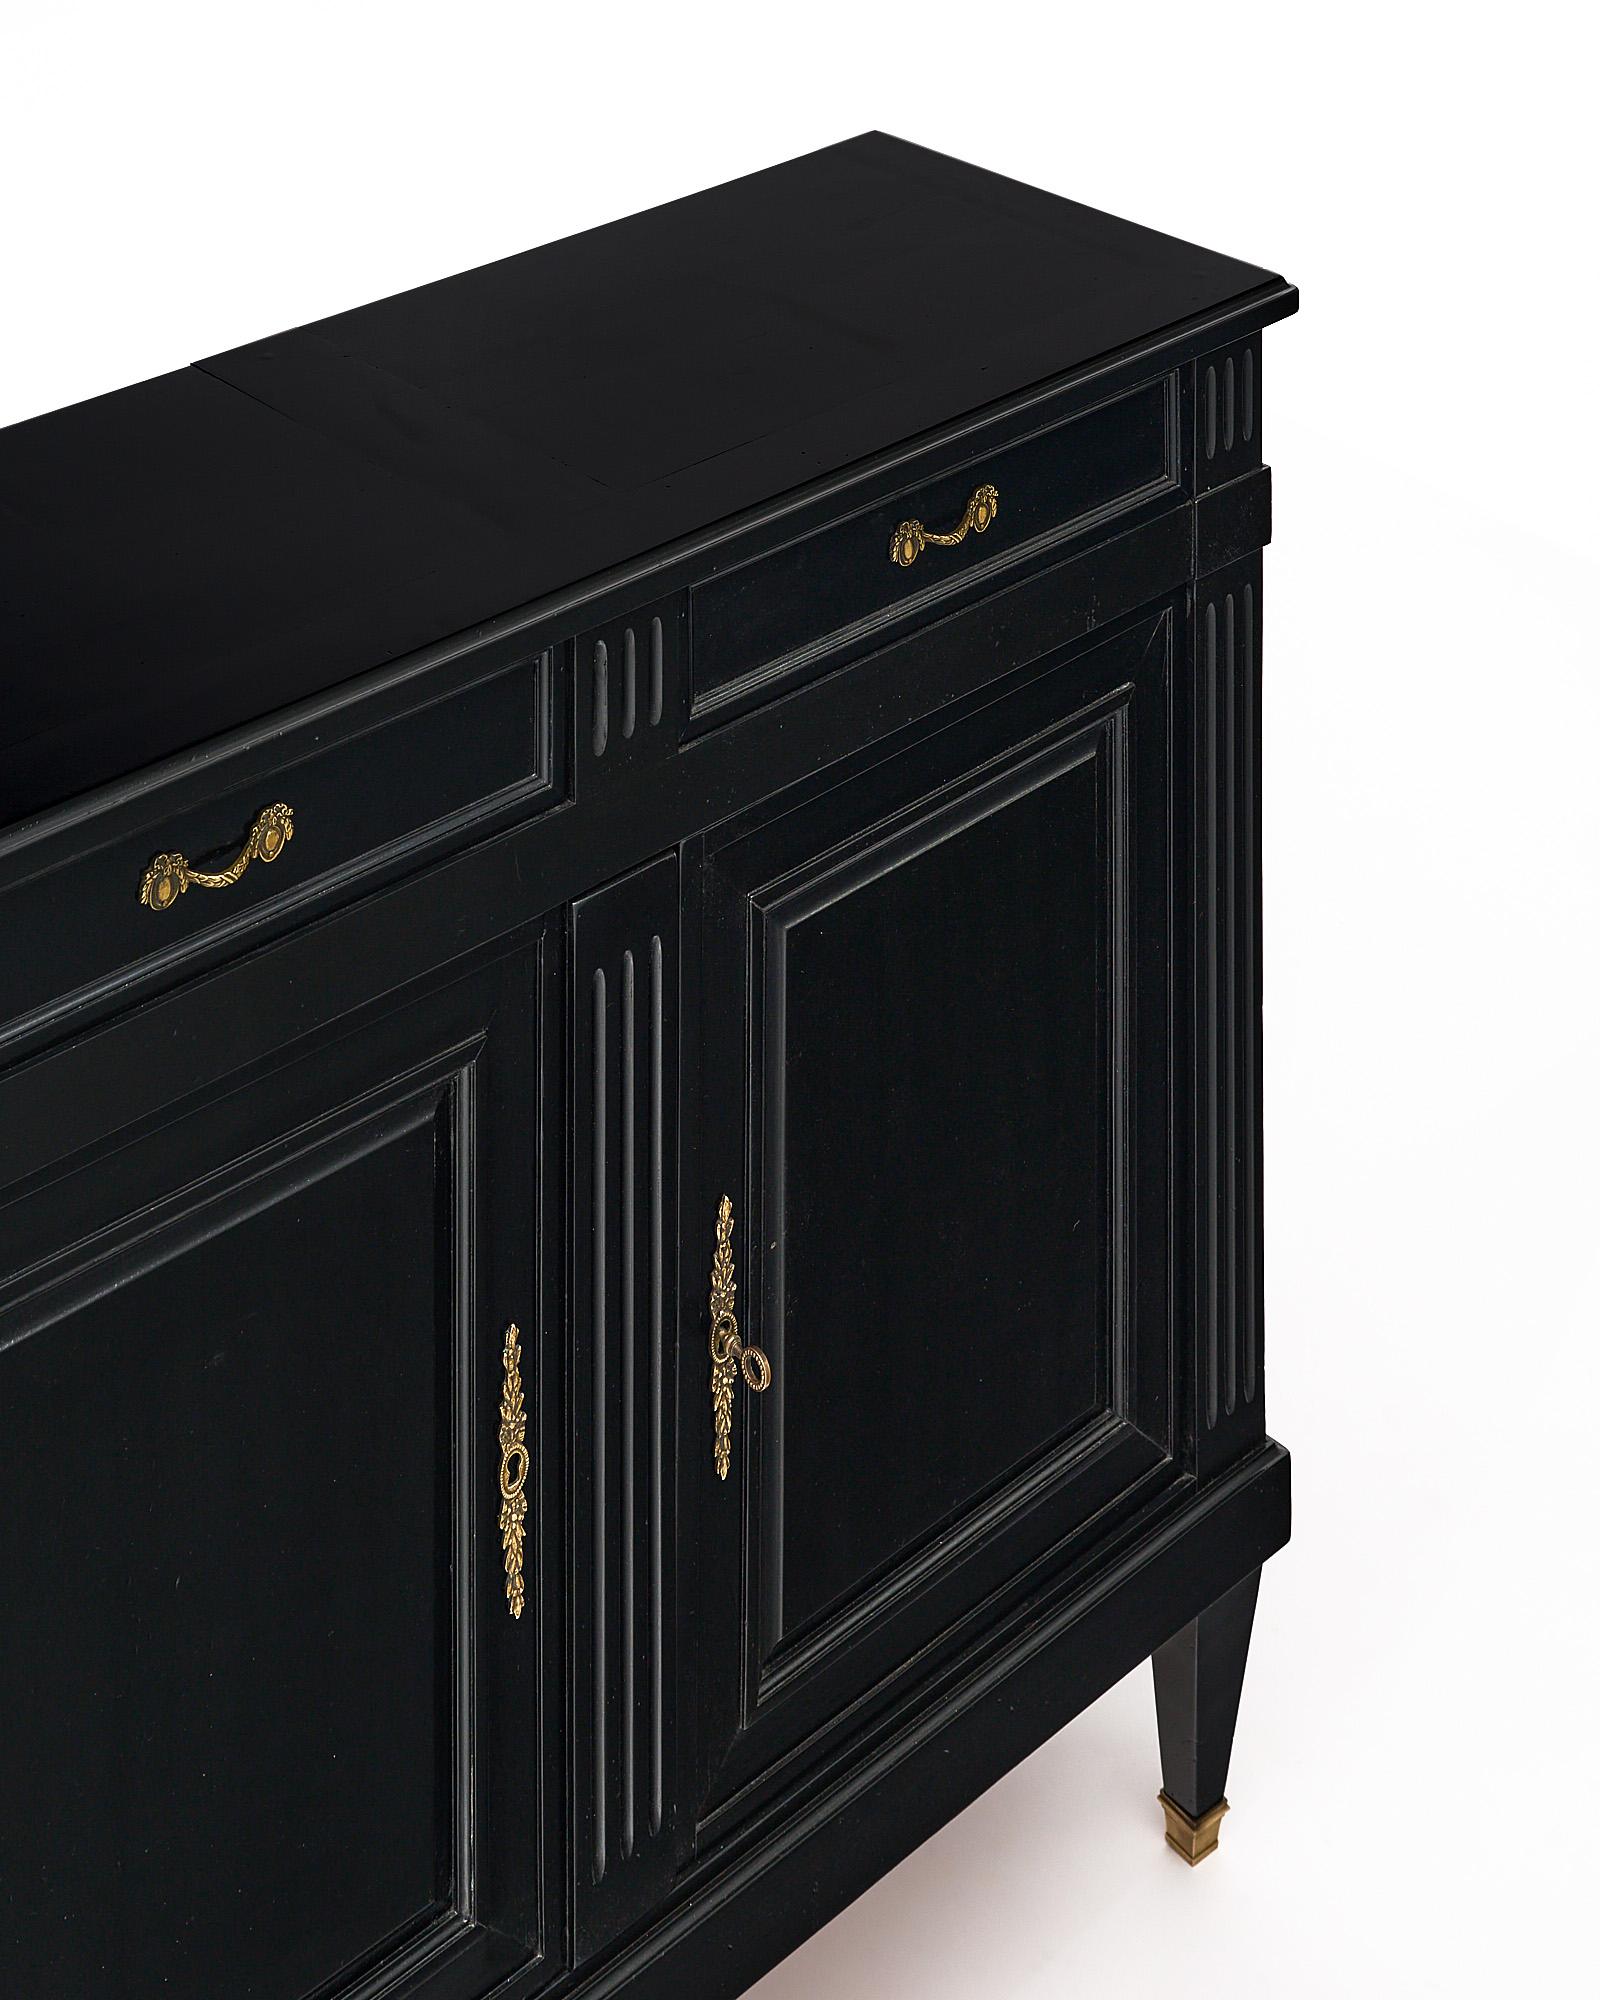 Buffet; French; finished in an ebonized French polish for a museum-quality luster. This Directoire style piece has two dovetailed drawers over two doors which open to an interior shelf. The hardware is all original and made of brass.